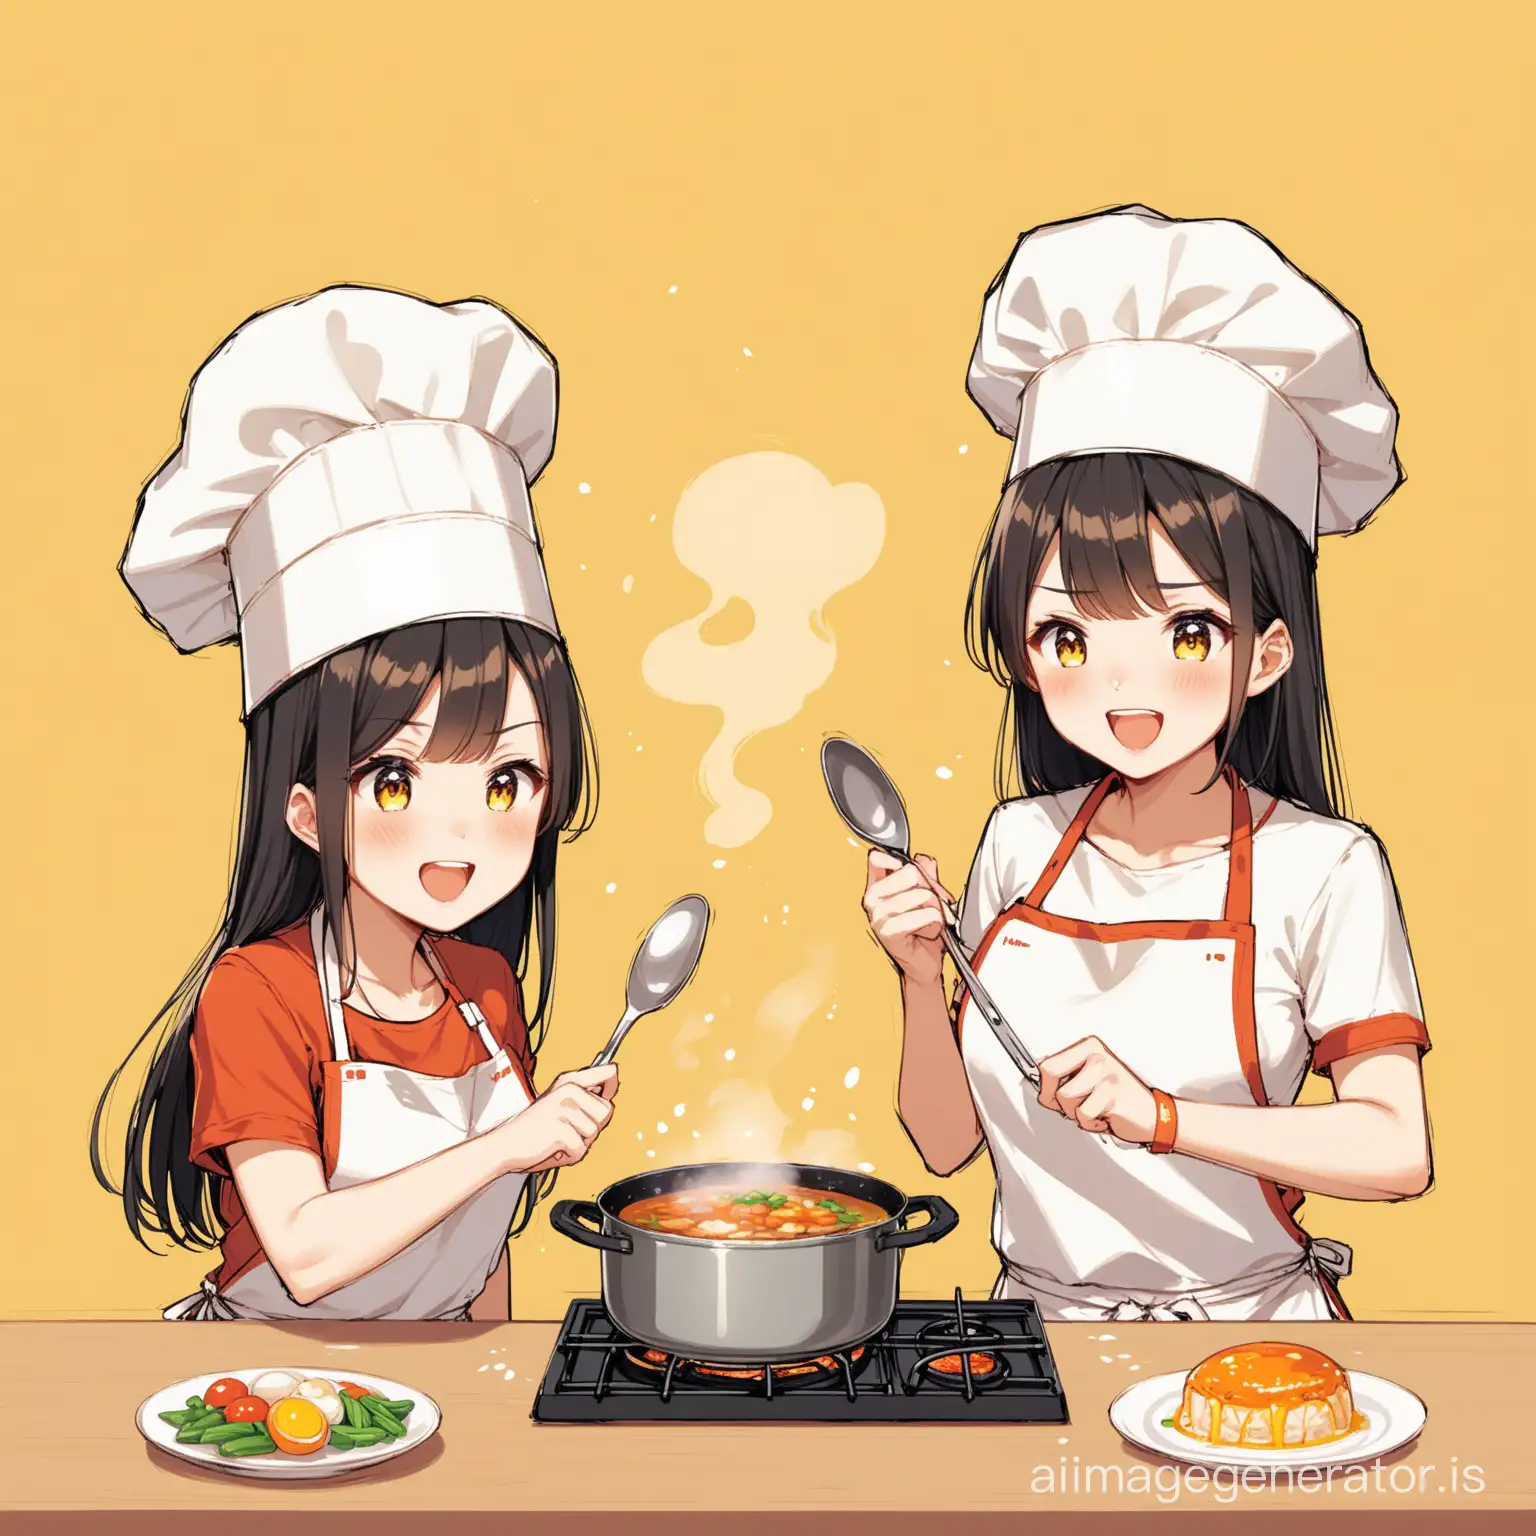 A Taiwanese girl participating in a cooking contest with an American friend and a yellow background